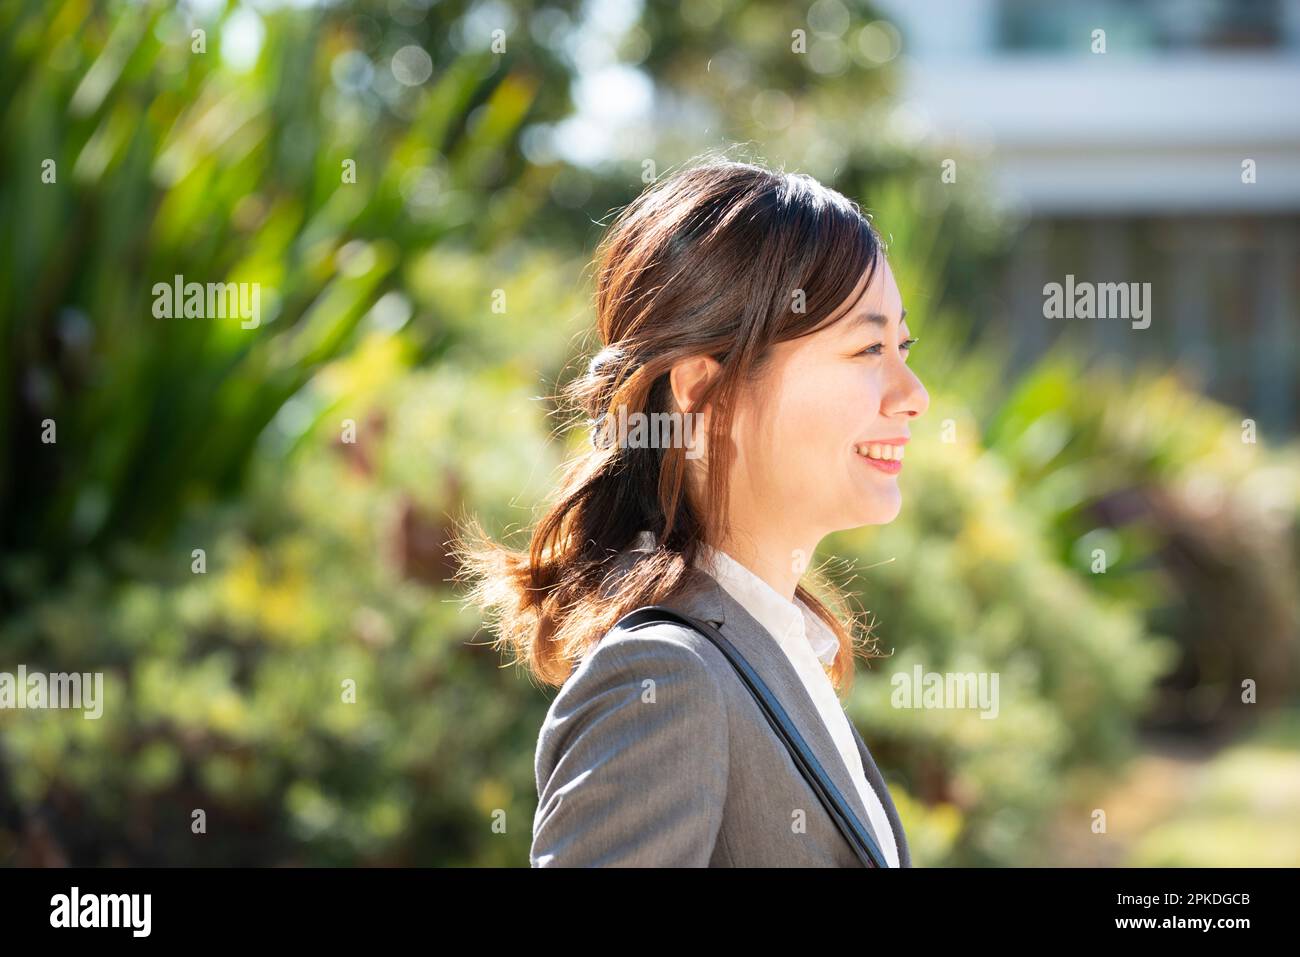 Profile of woman in suit smiling Stock Photo